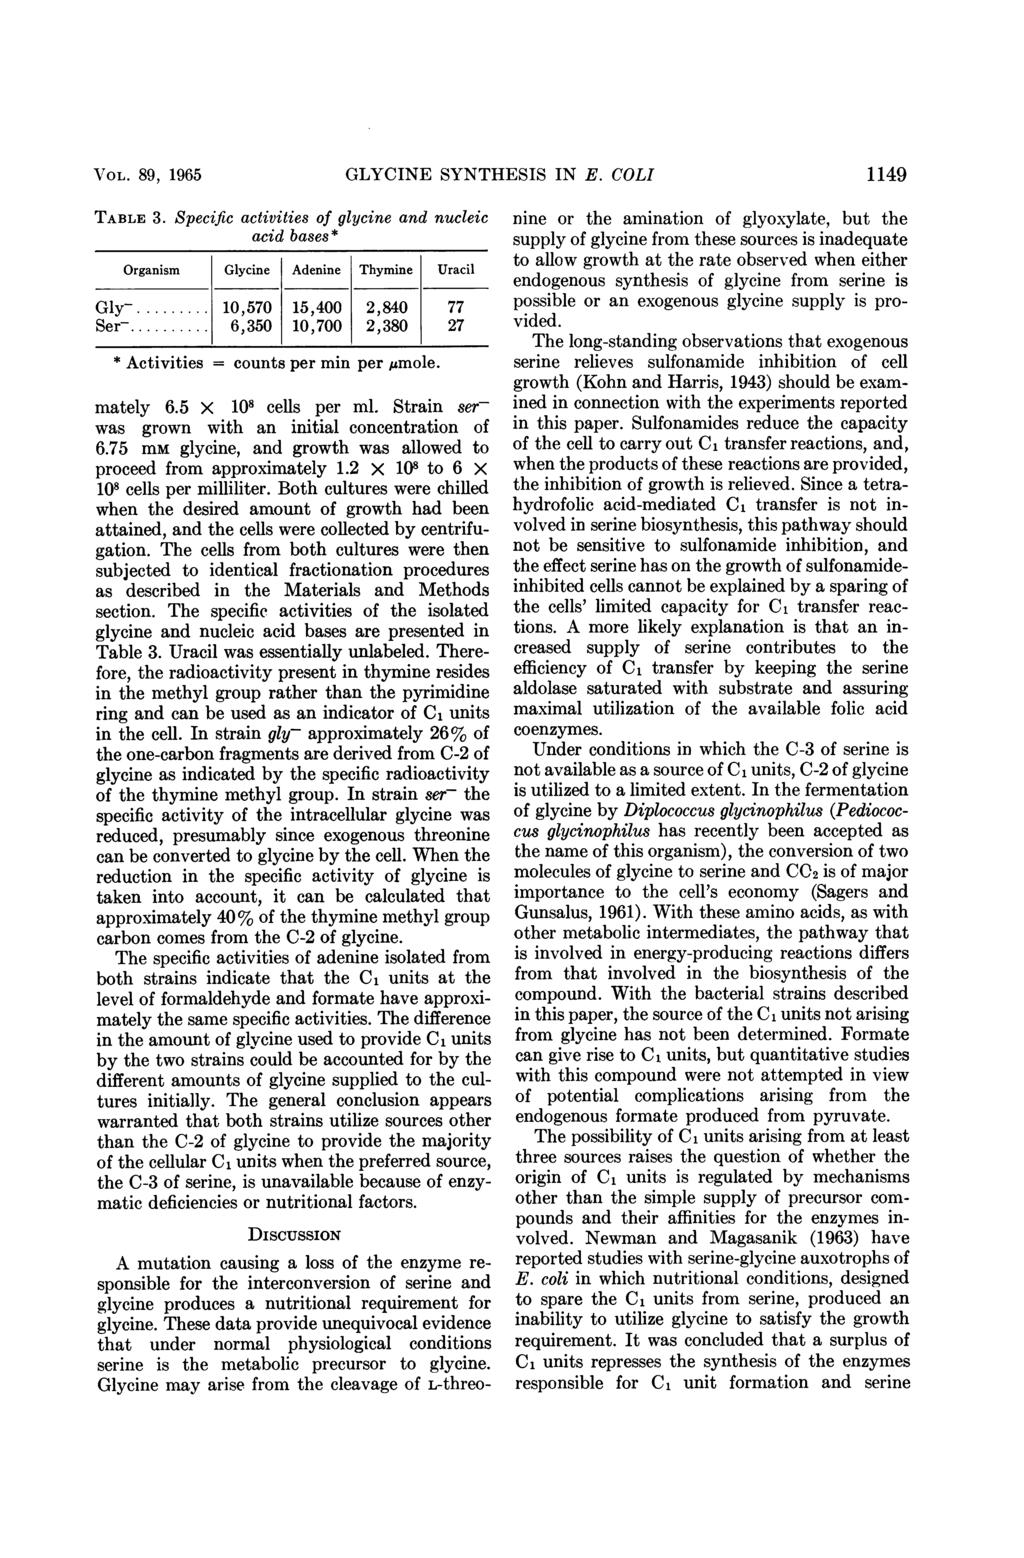 VOL. 89, 1965 GLYCINE SYNTHESIS IN E. COLI 1149 TABLE 3.